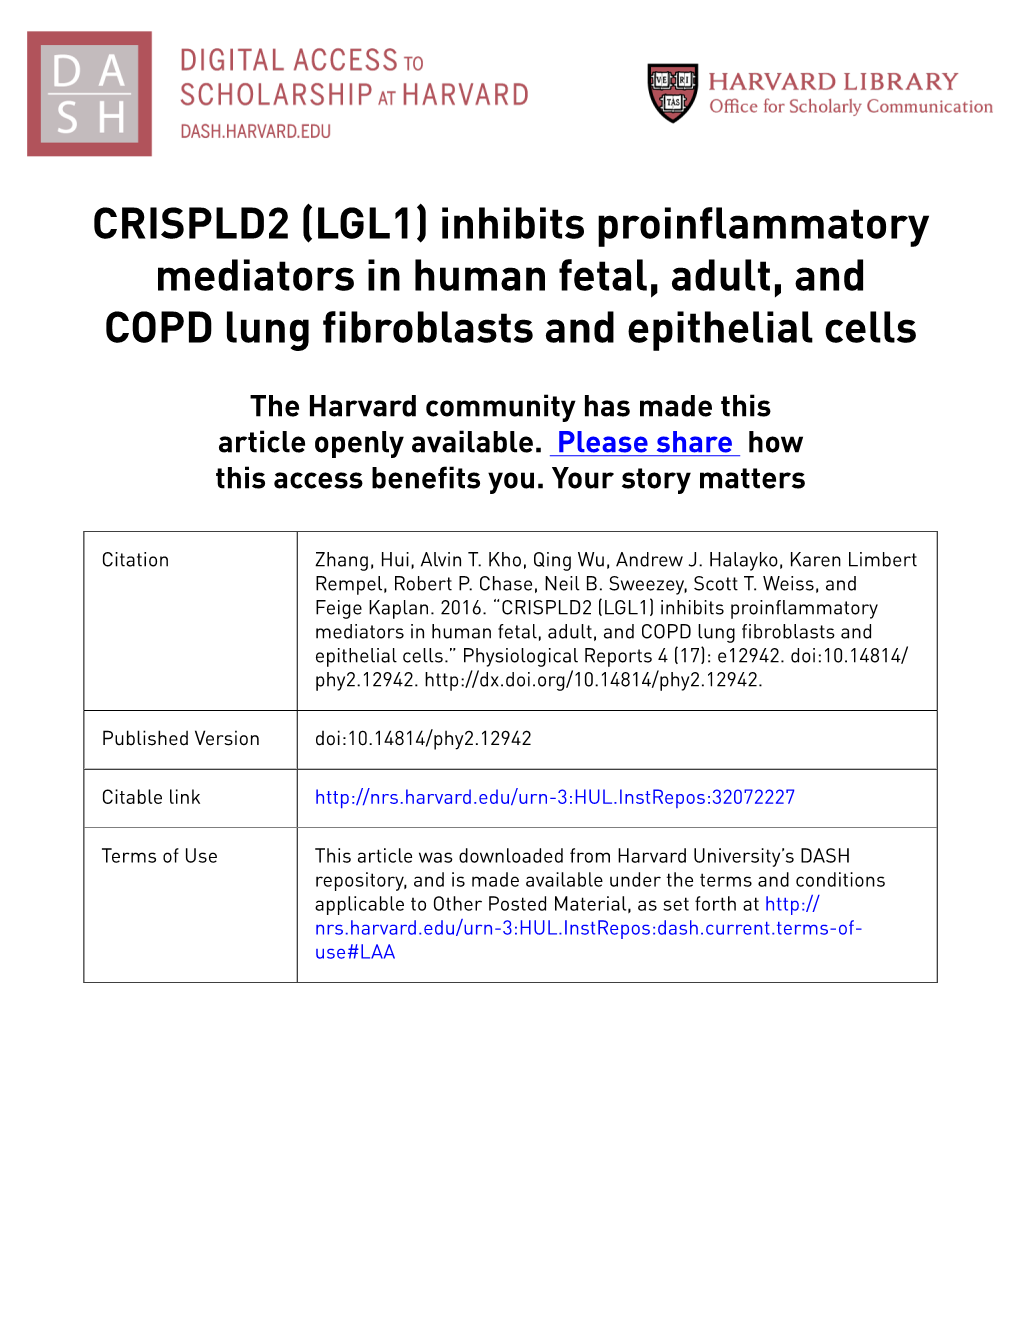 CRISPLD2 (LGL1) Inhibits Proinflammatory Mediators in Human Fetal, Adult, and COPD Lung Fibroblasts and Epithelial Cells